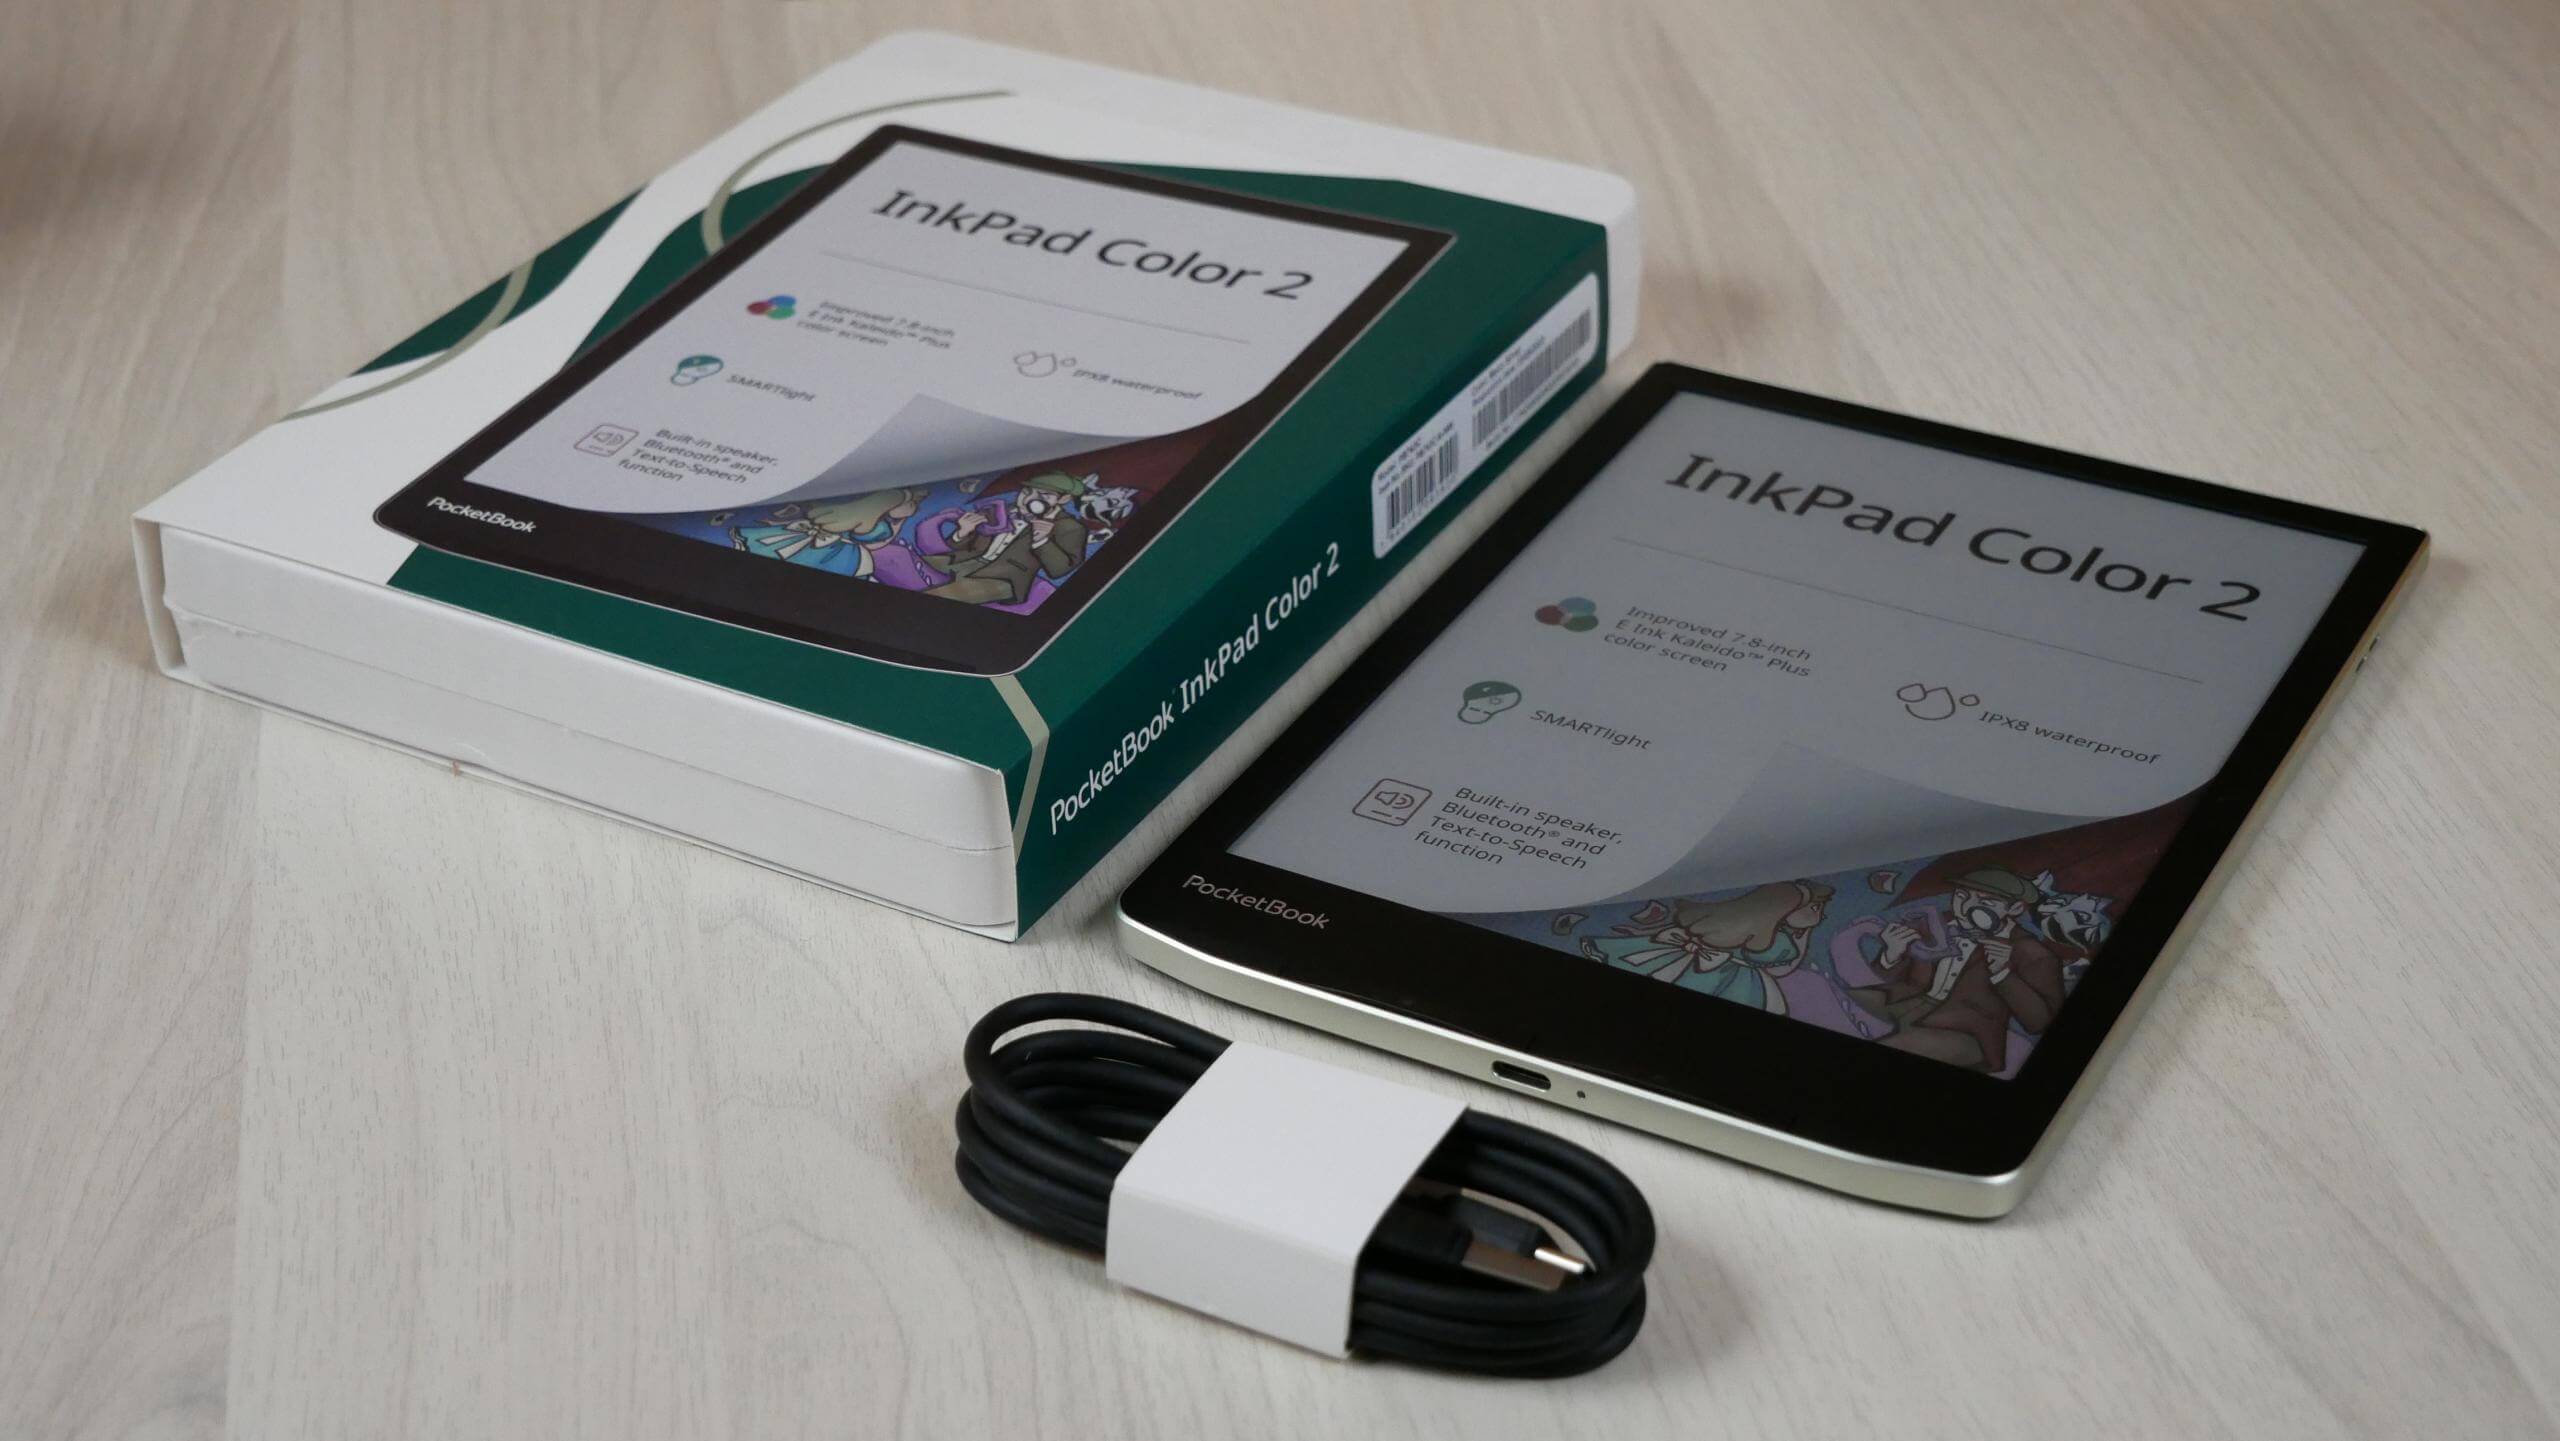 First look at the Pocketbook InkPad Color 2 e-Reader - Good e-Reader